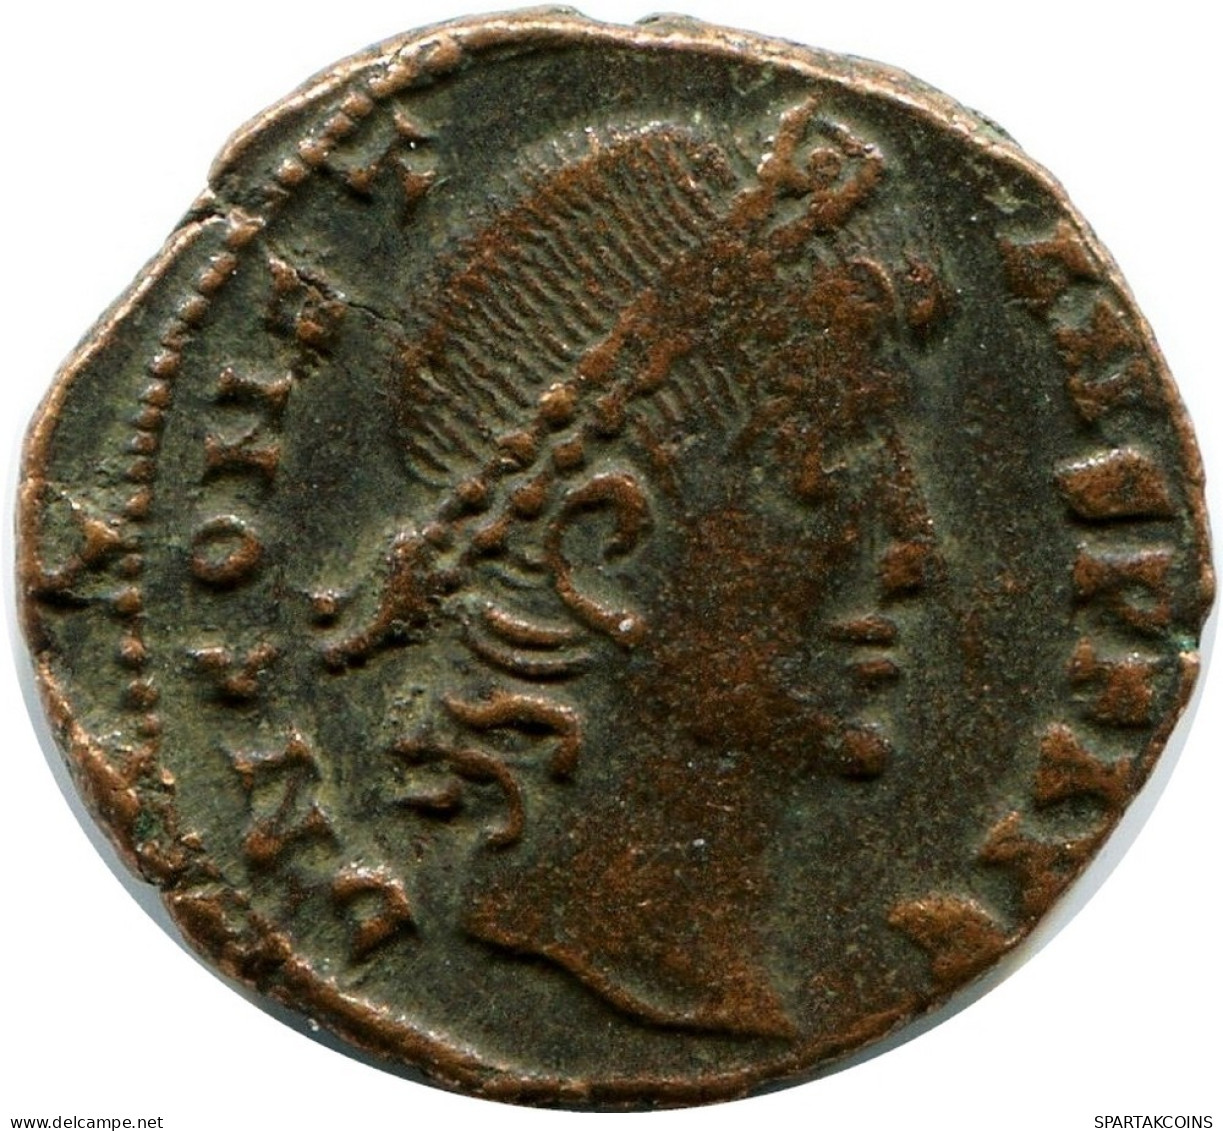 CONSTANS MINTED IN ALEKSANDRIA FOUND IN IHNASYAH HOARD EGYPT #ANC11435.14.D.A - The Christian Empire (307 AD To 363 AD)